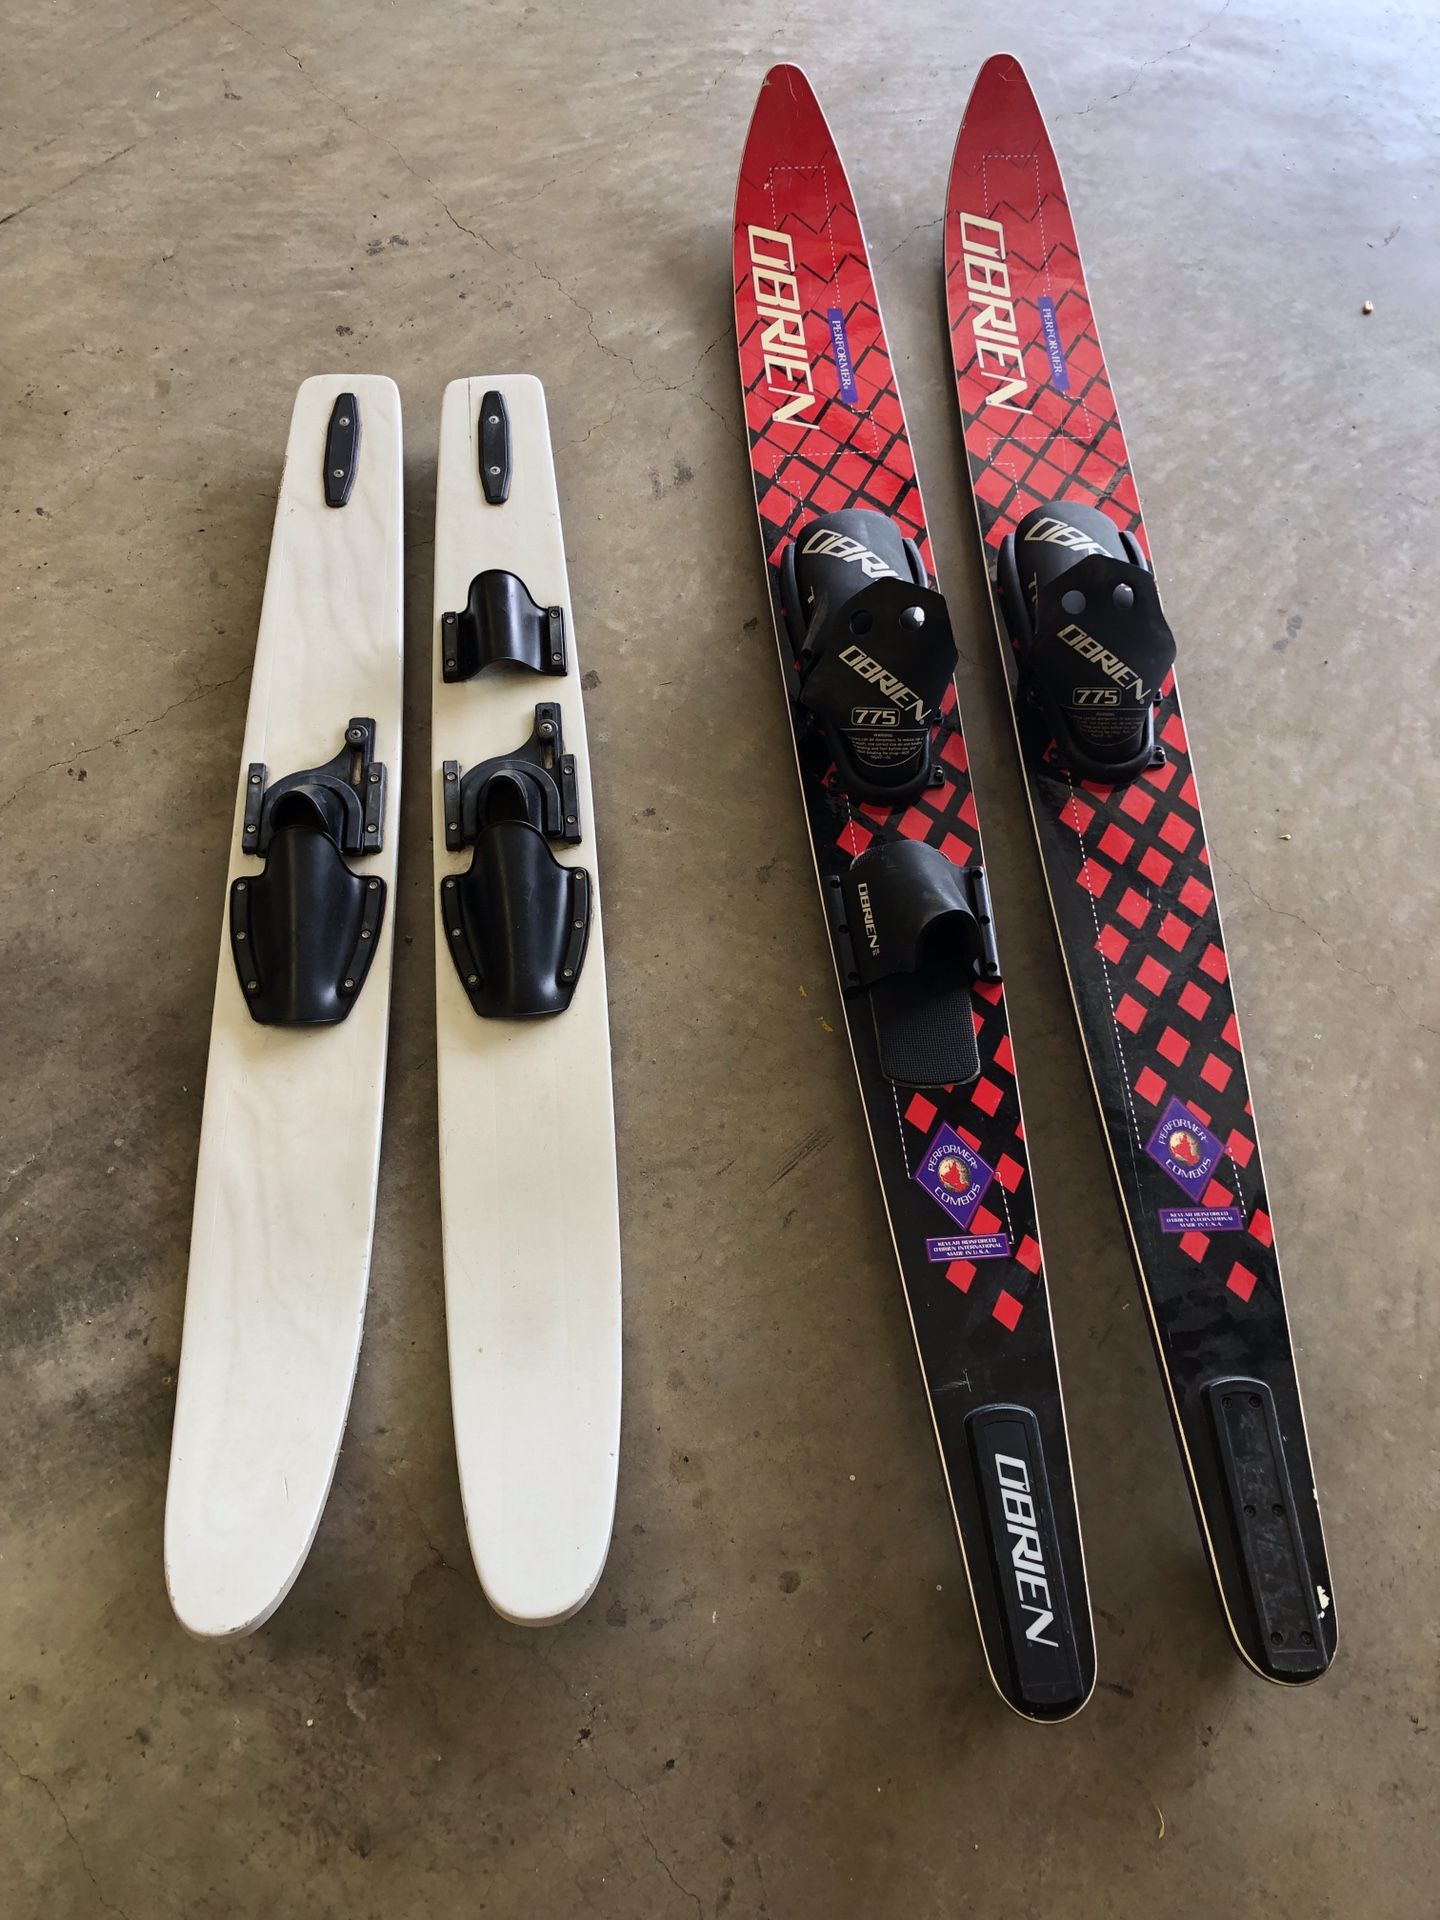 Pair of O’Brien water skis and a pair of children trainer skis